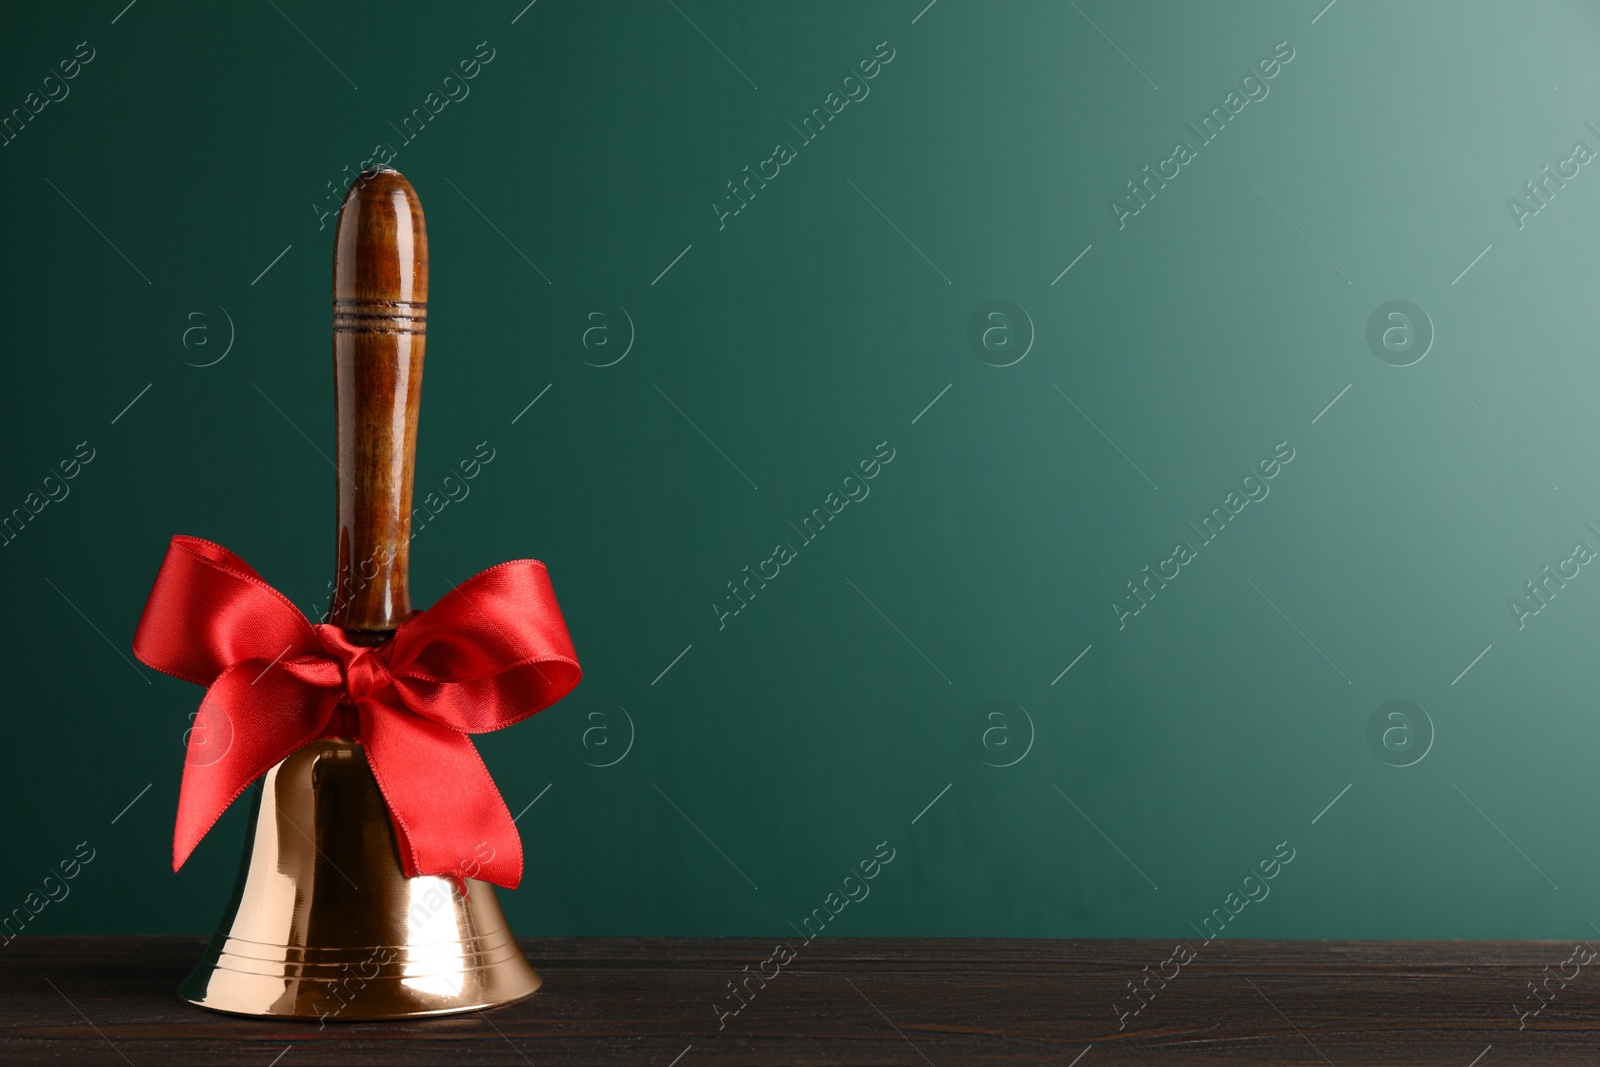 Photo of Golden bell with red bow on wooden table near green chalkboard, space for text. School days